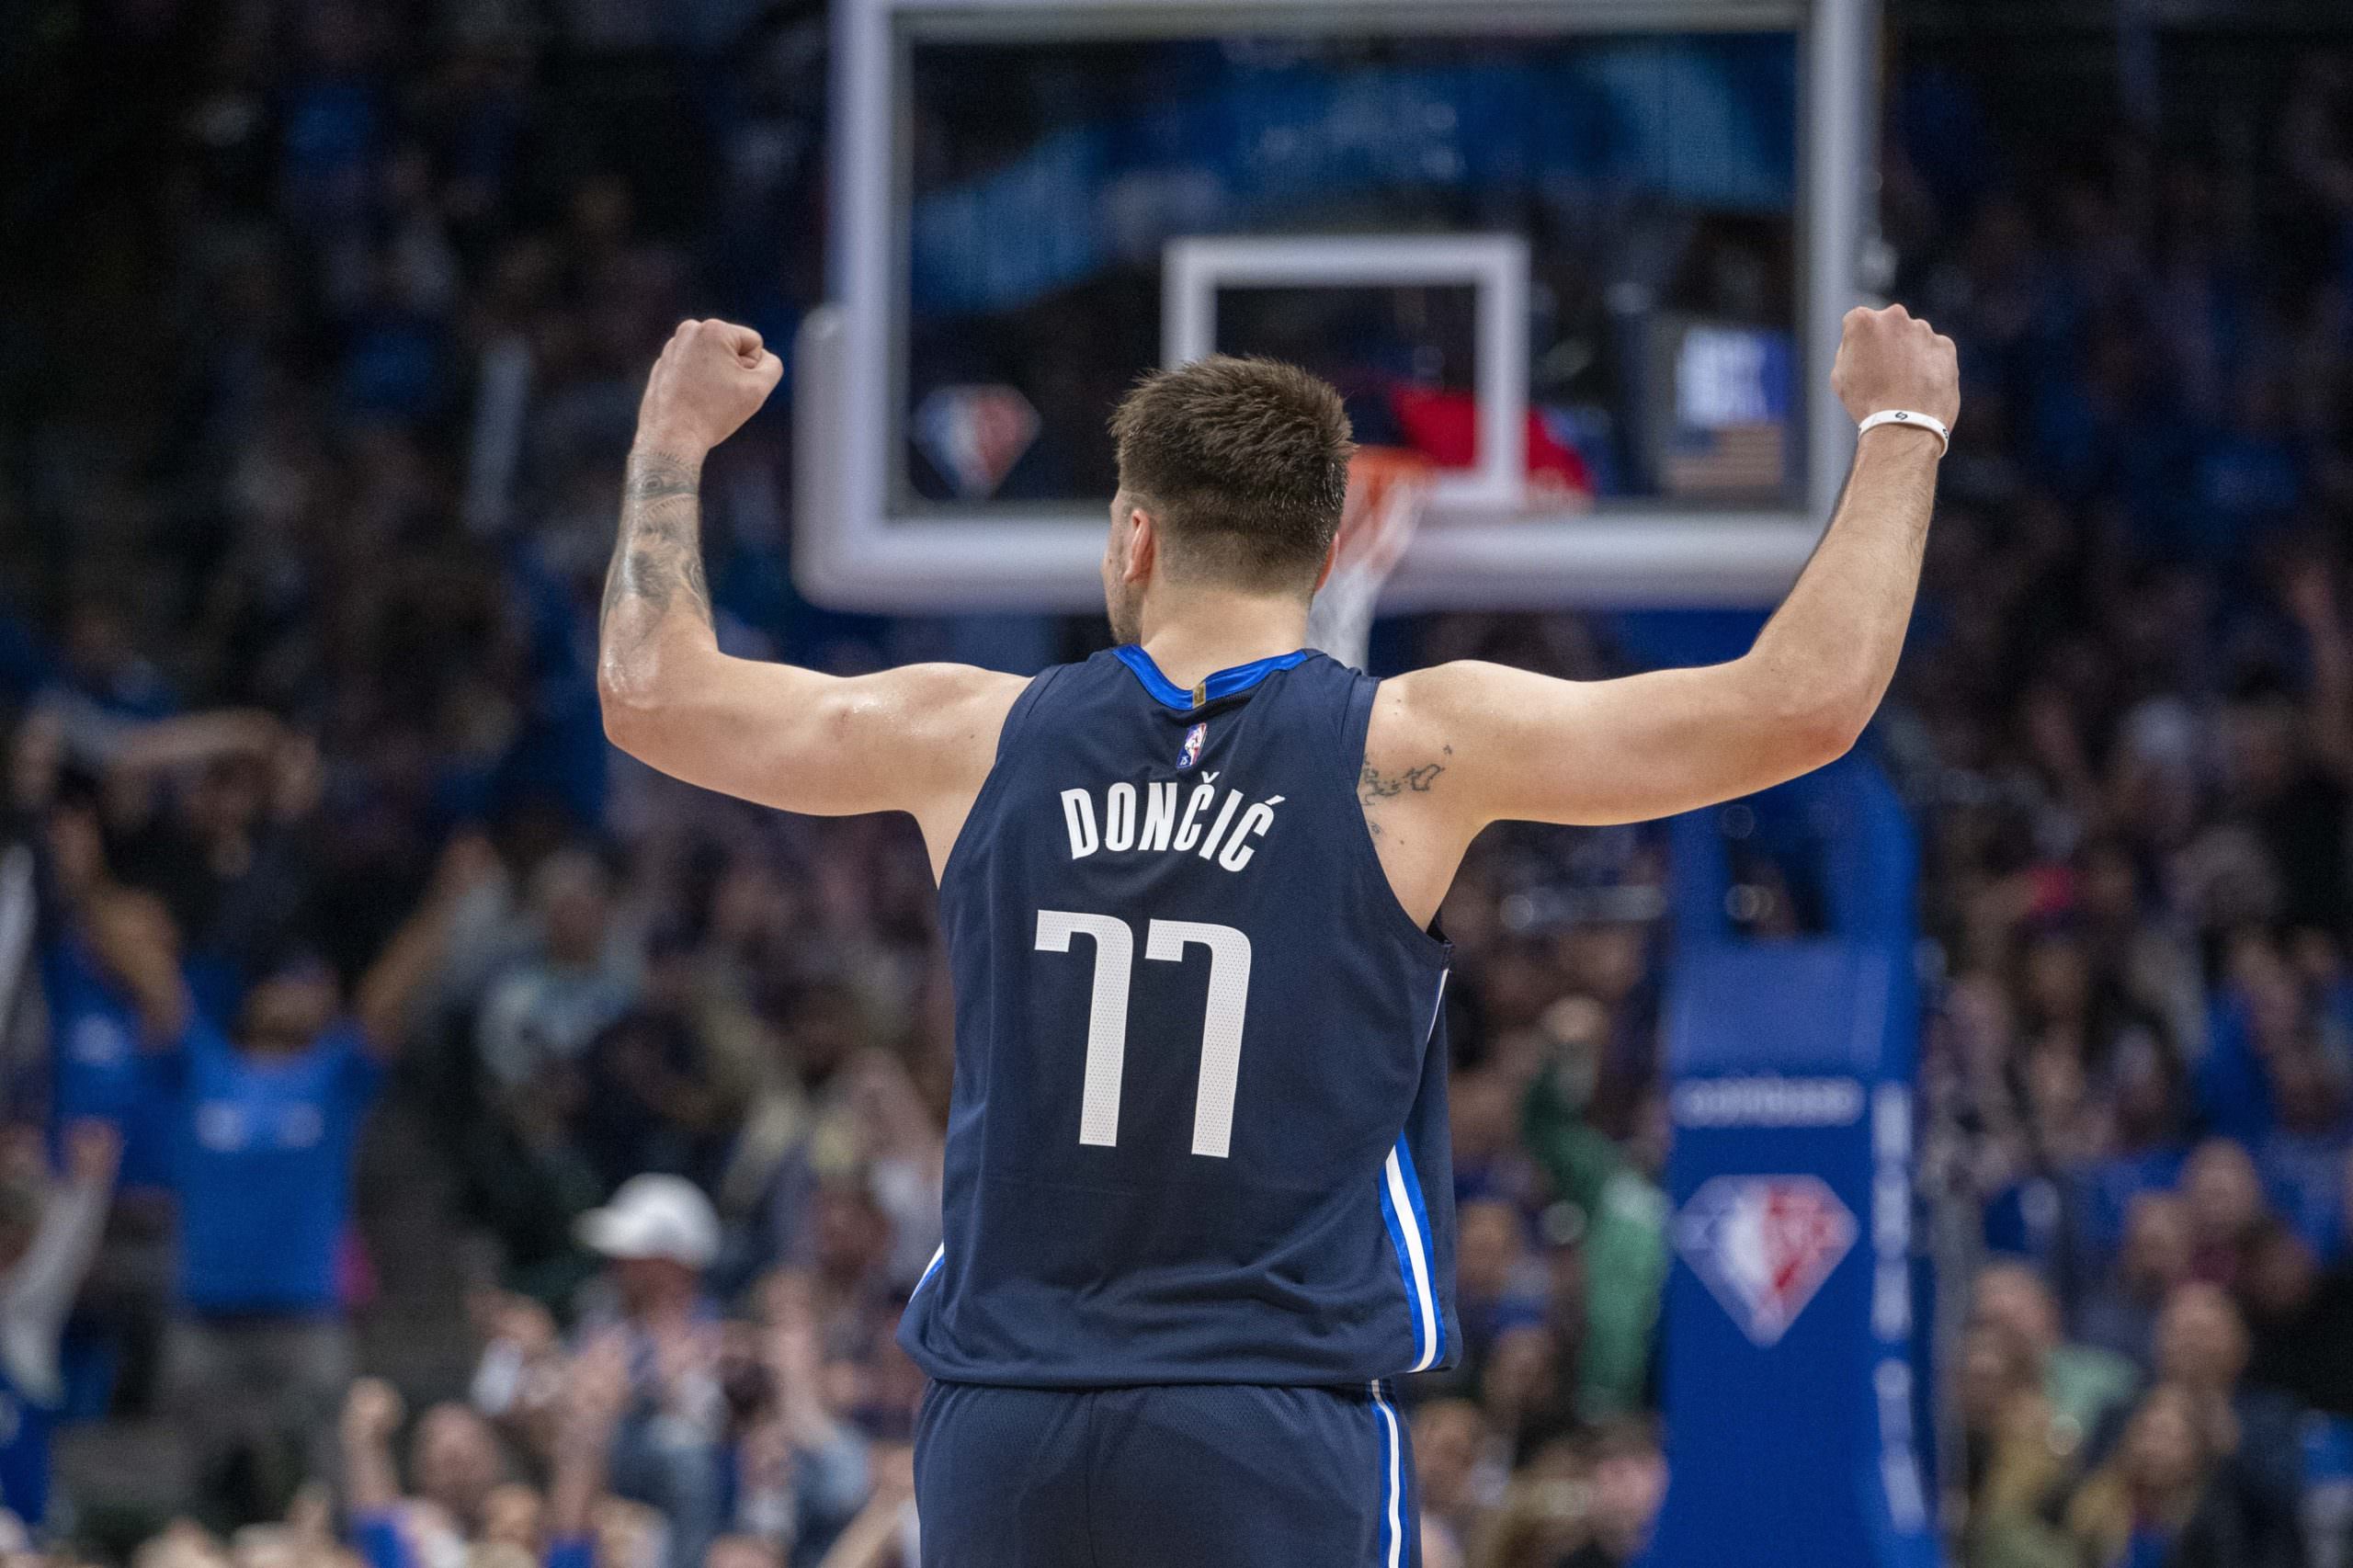 The Dallas Mavericks will close out the Utah Jazz tonight in Game 6